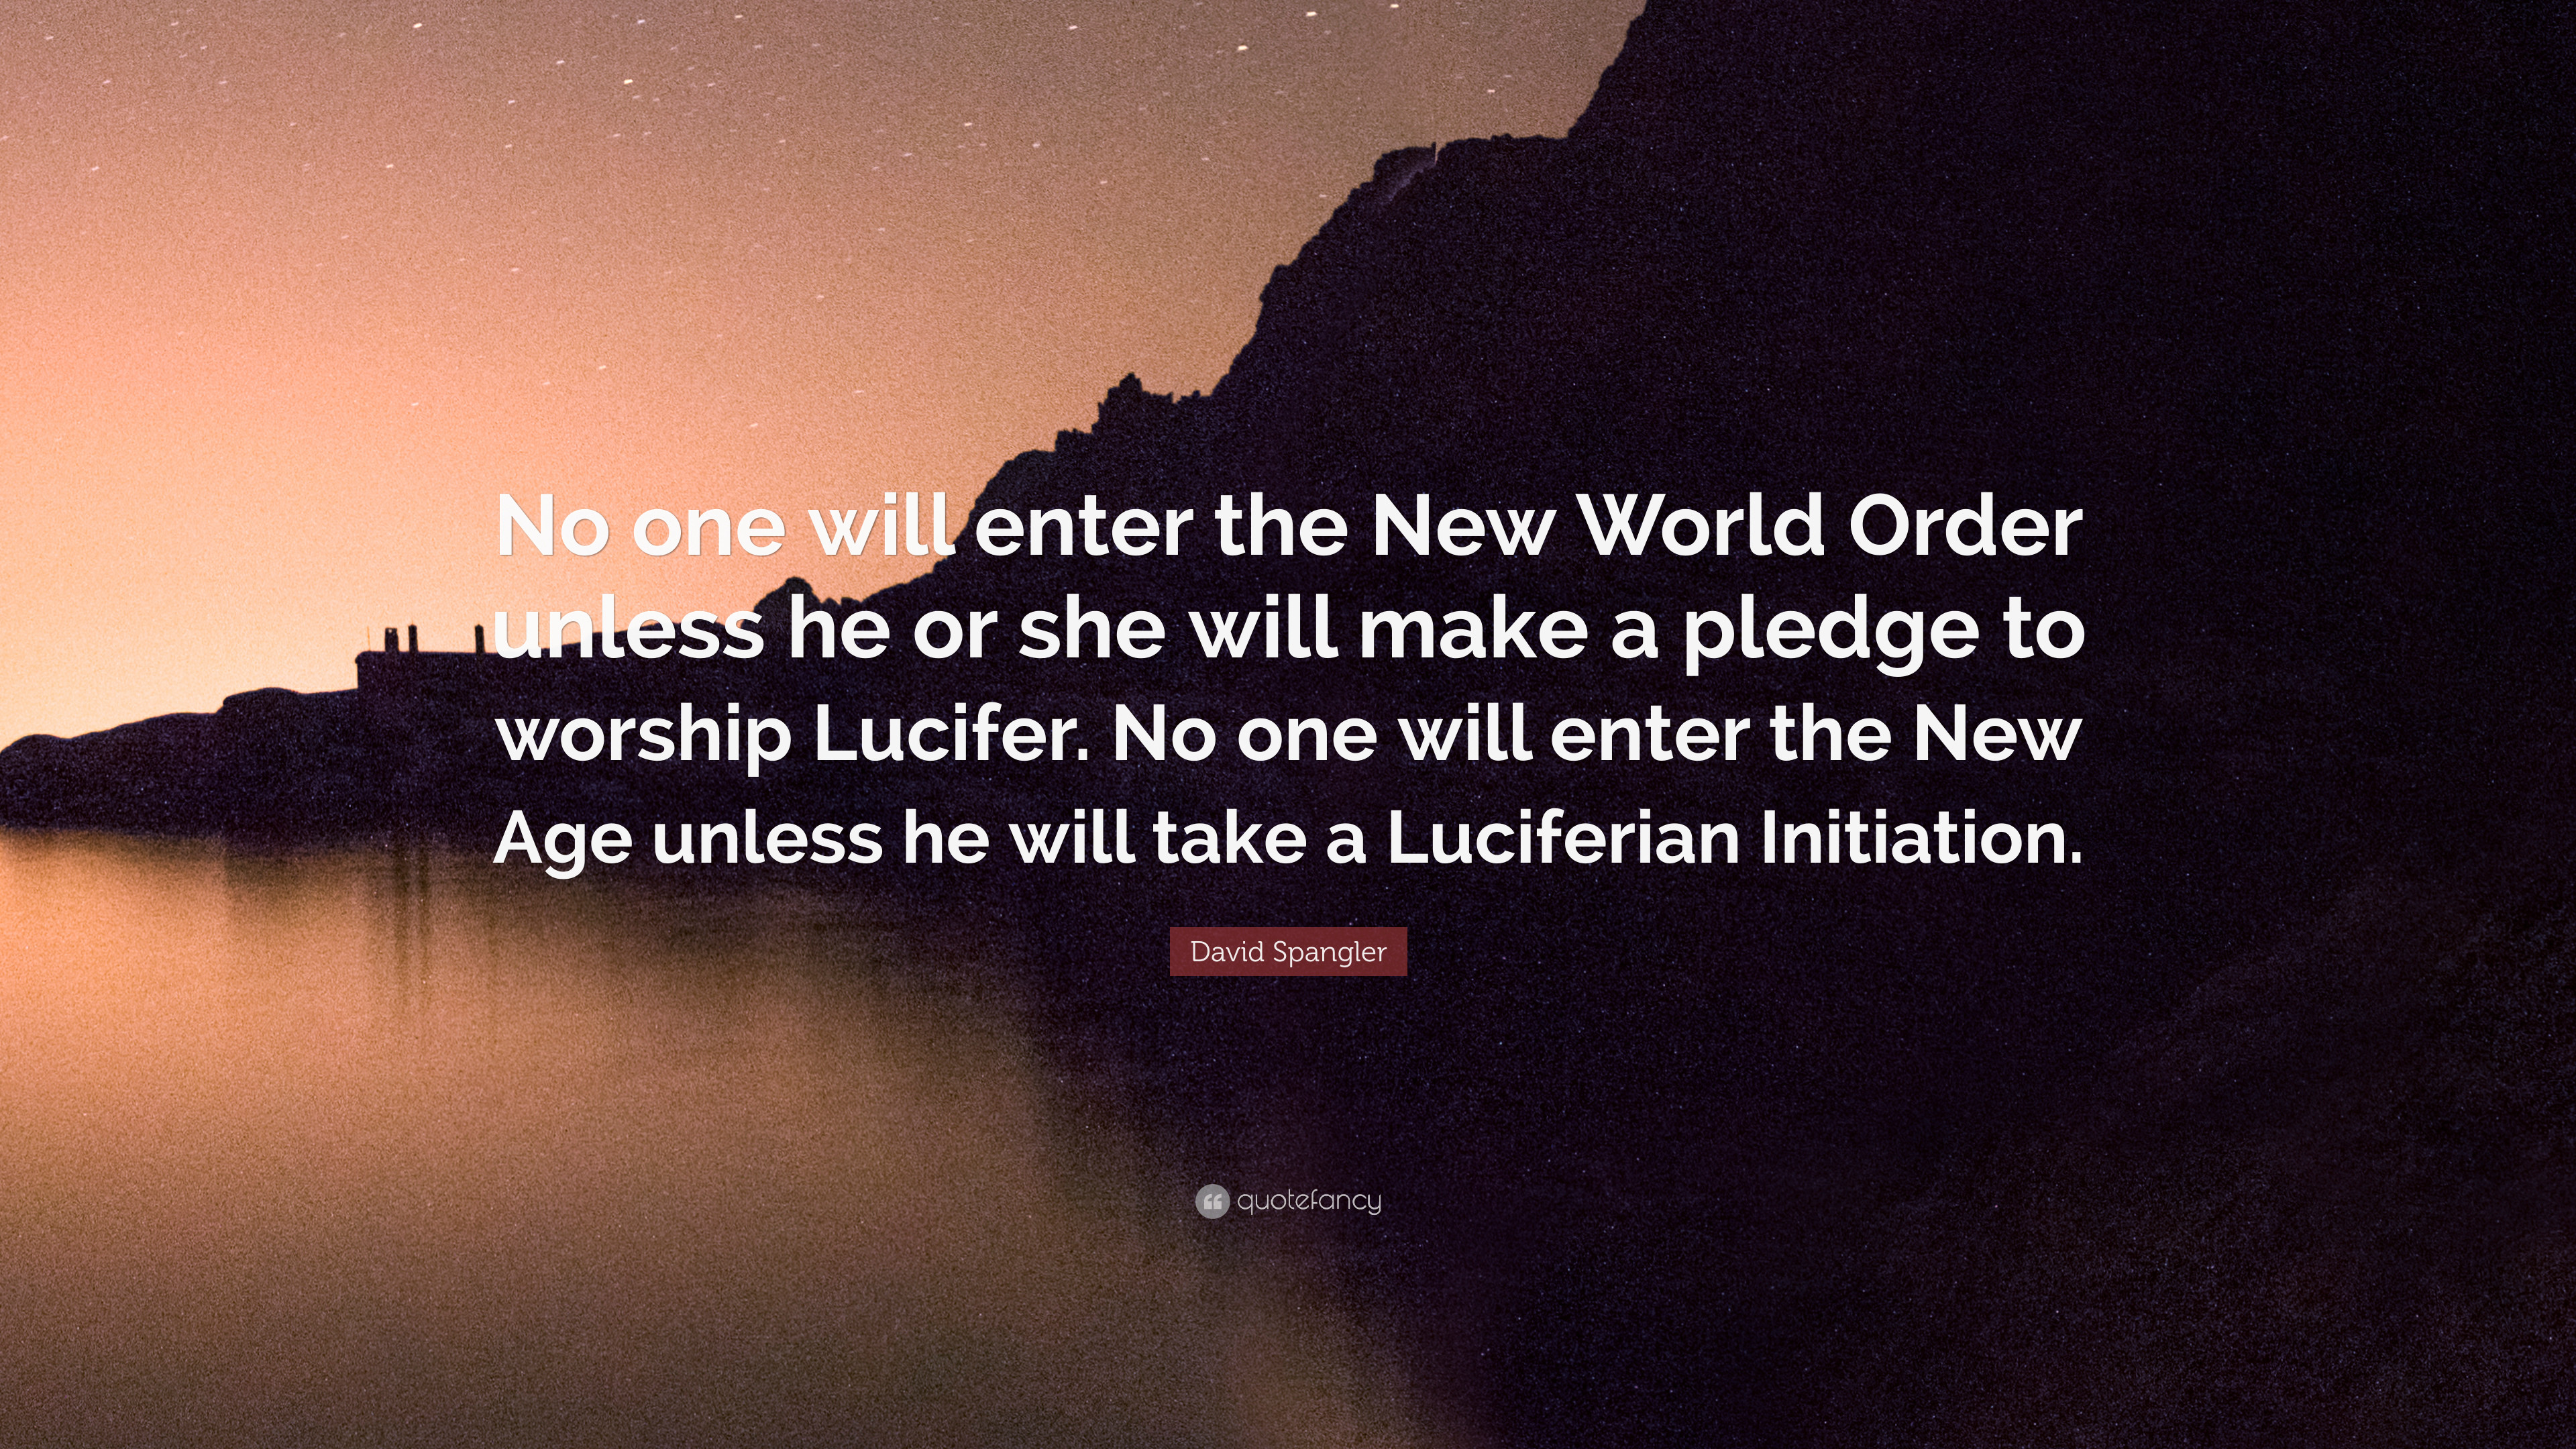 3840x2160 David Spangler Quote: “No one will enter the New World Order unless he or